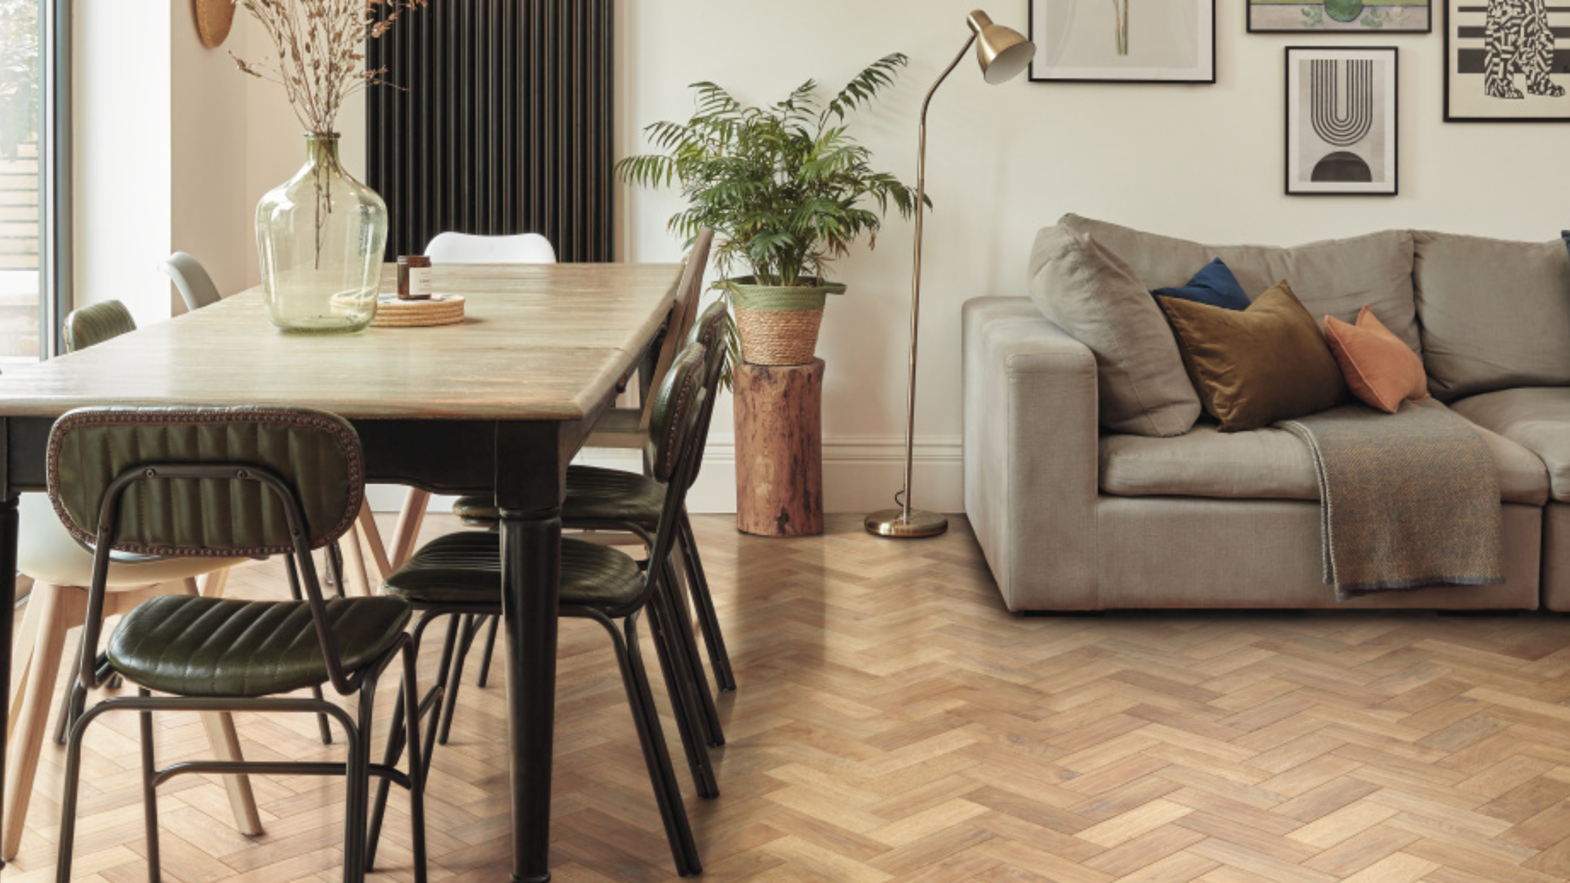 Karndean blond oak parquet wood flooring in a dining and living room